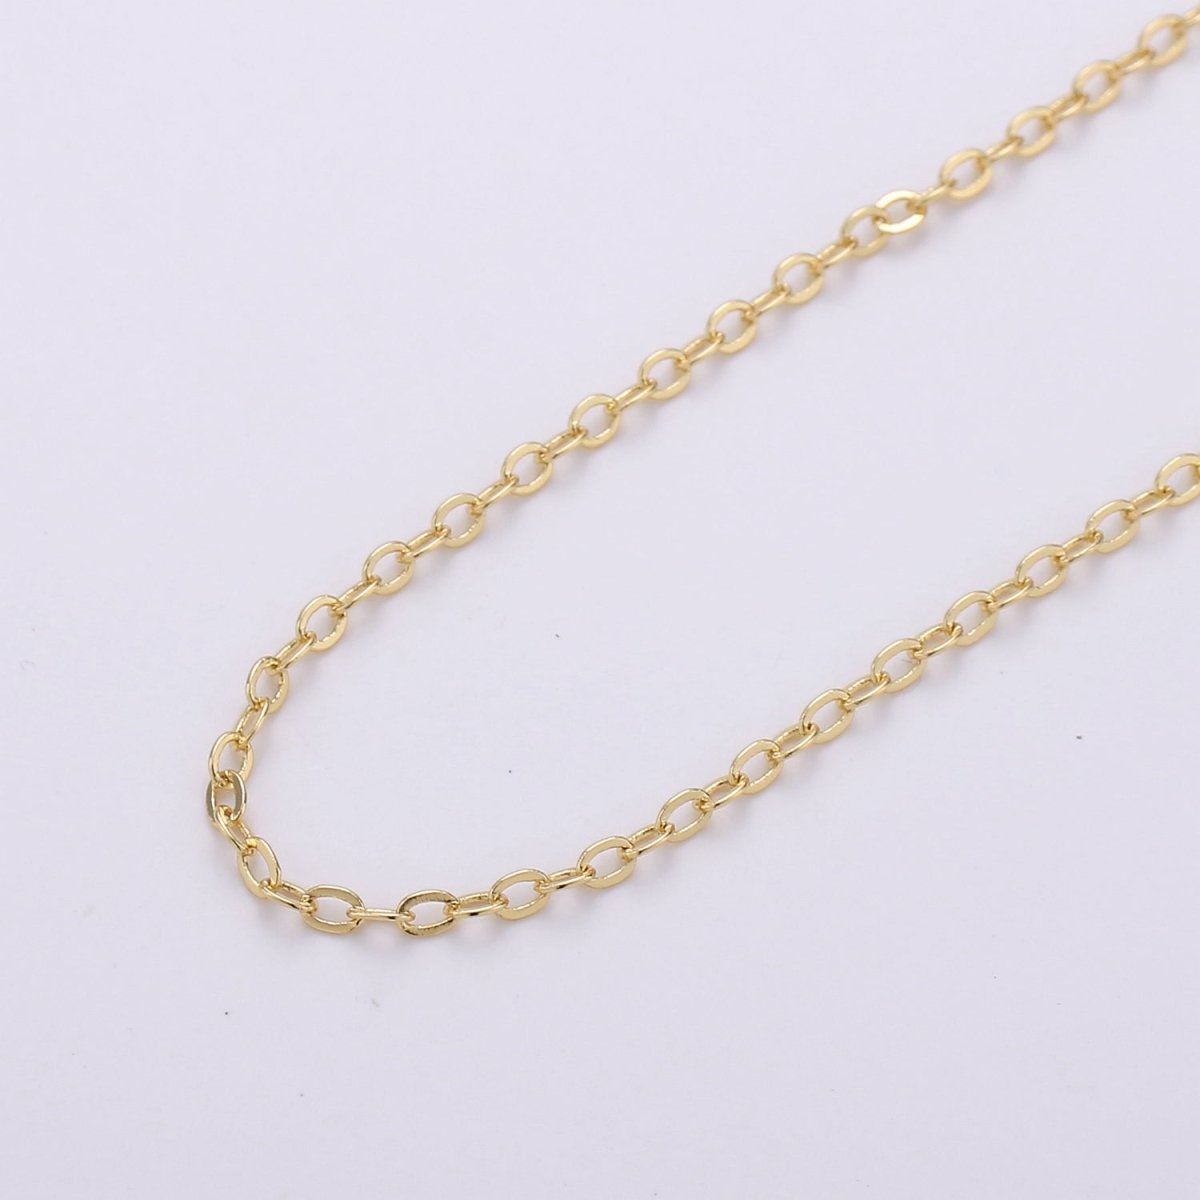 Gold Oval Cable Link Chain, 2mm Gold Filled Cable Chain by Yard, Unfinished Chain For Jewelry Supply | ROLL-149 Clearance Pricing Overstock - DLUXCA